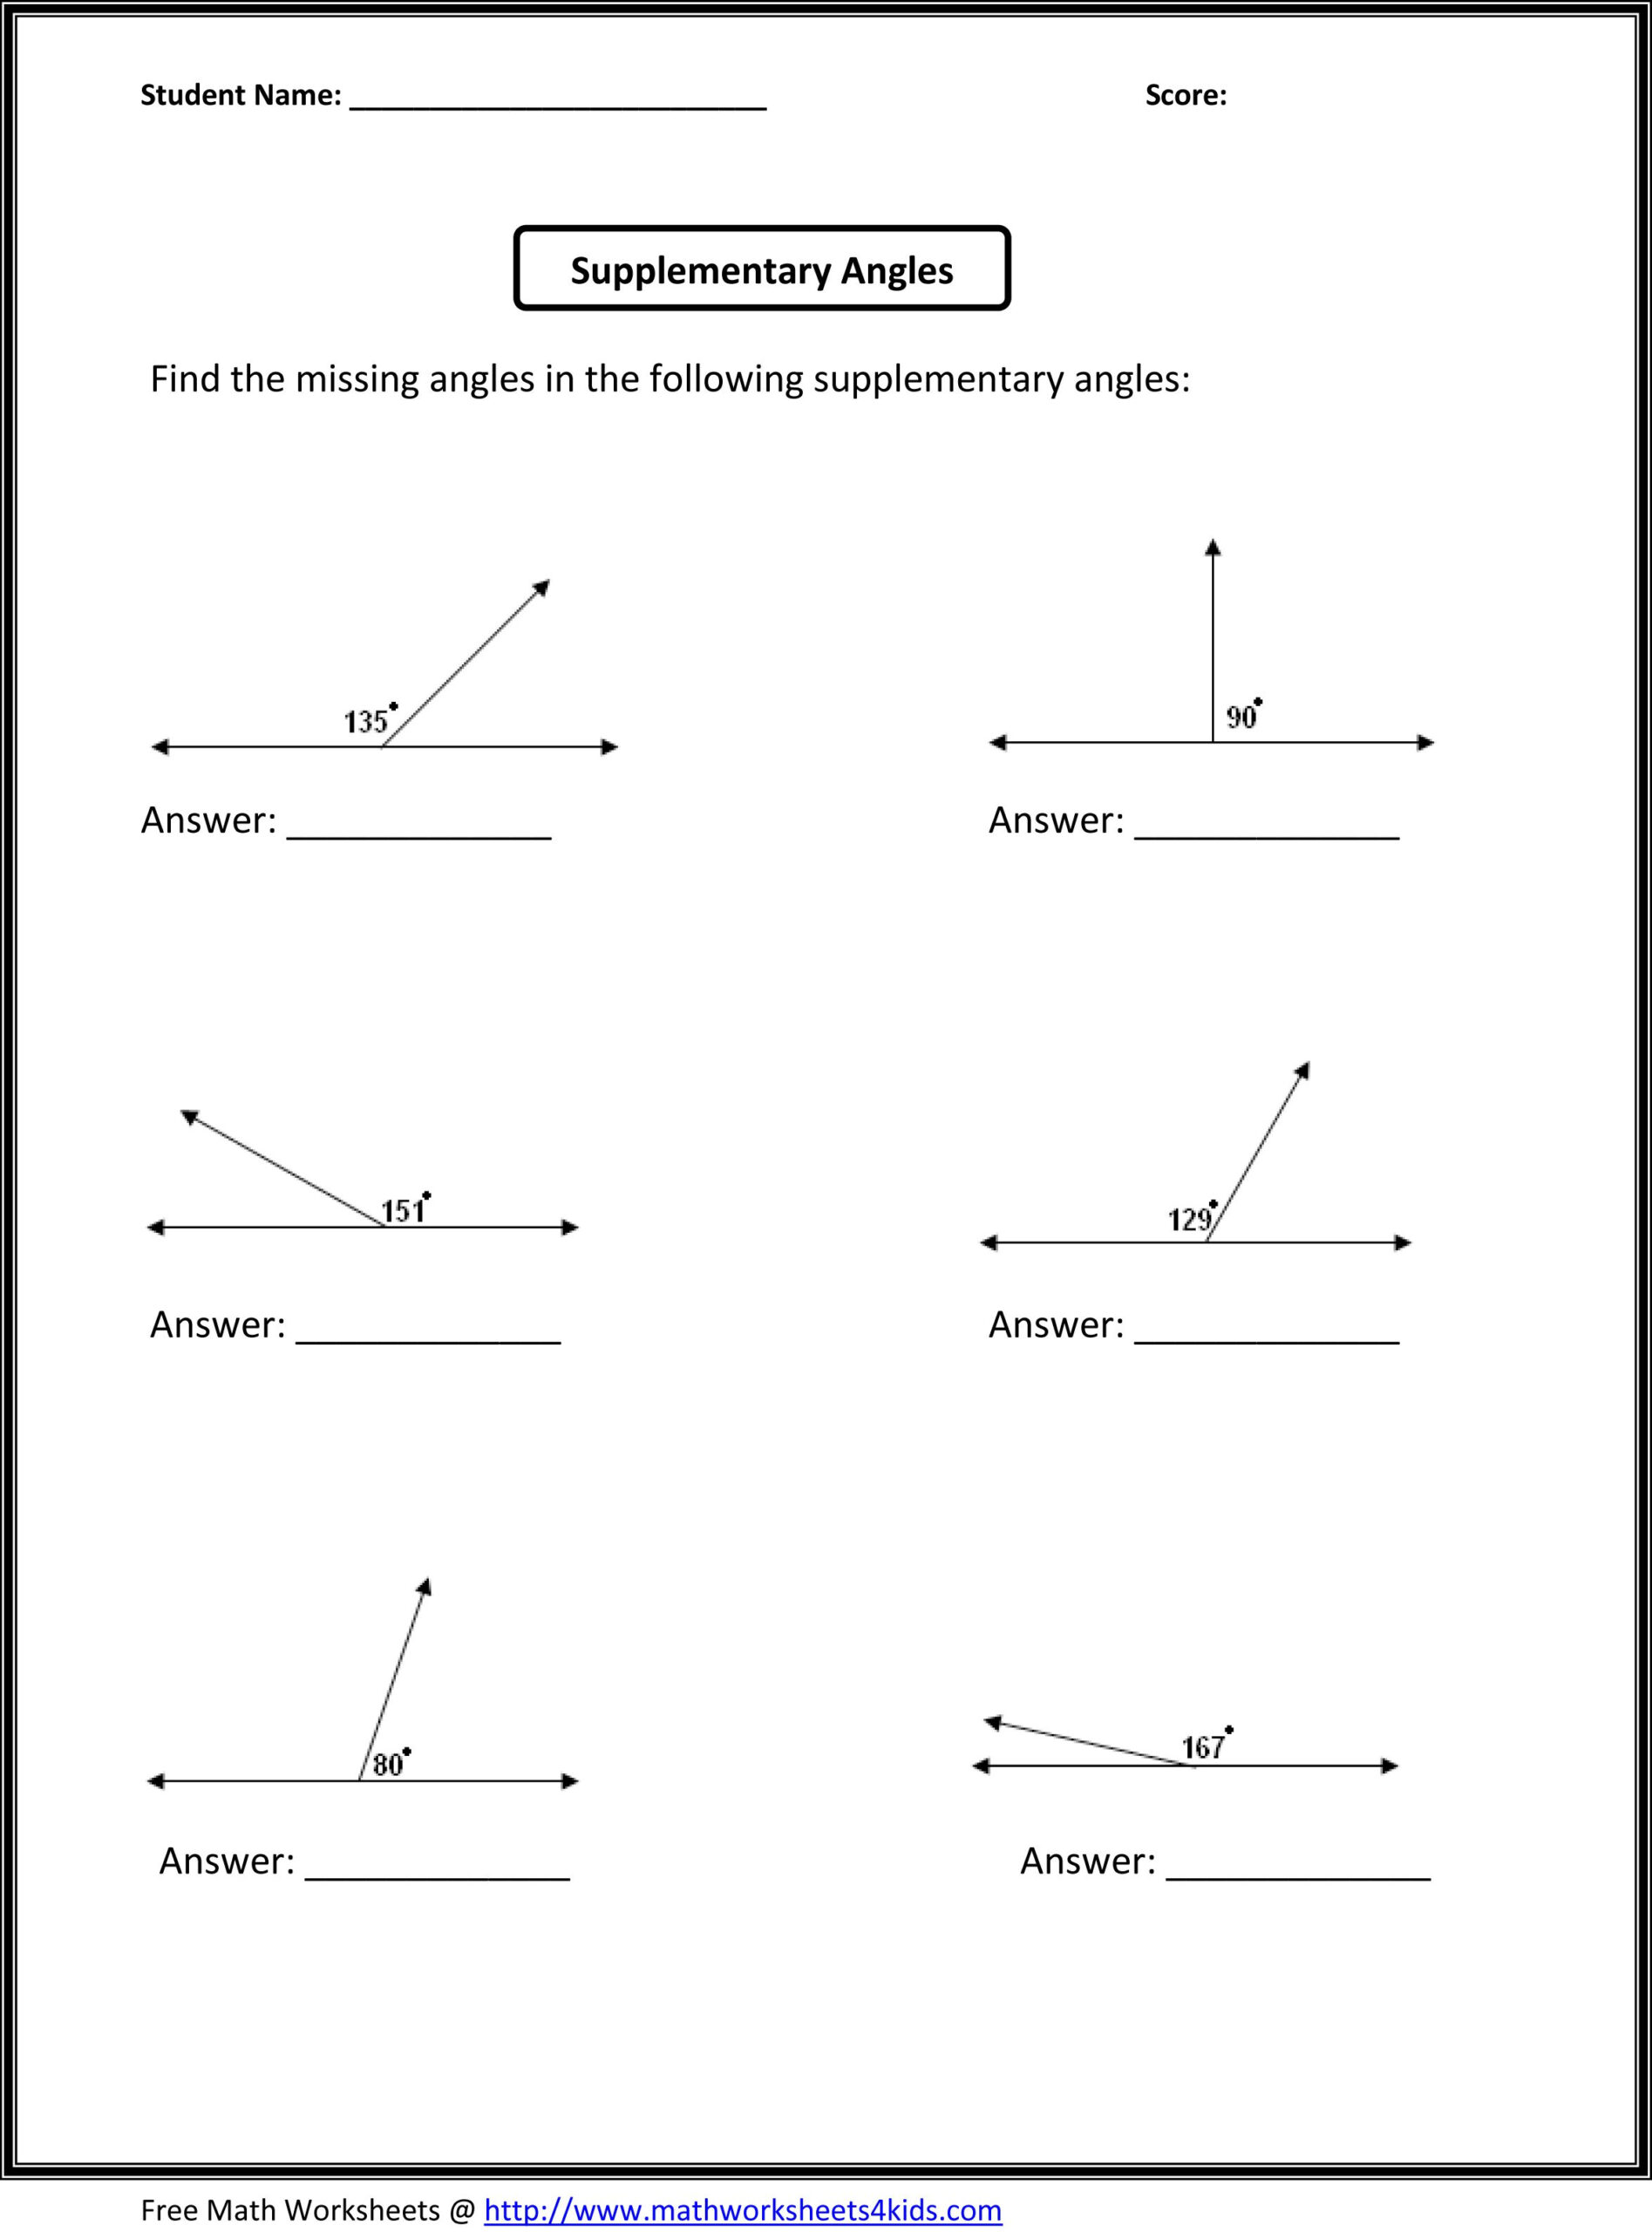 Finding Complementary Angles Worksheet Answer Key Thekidsworksheet